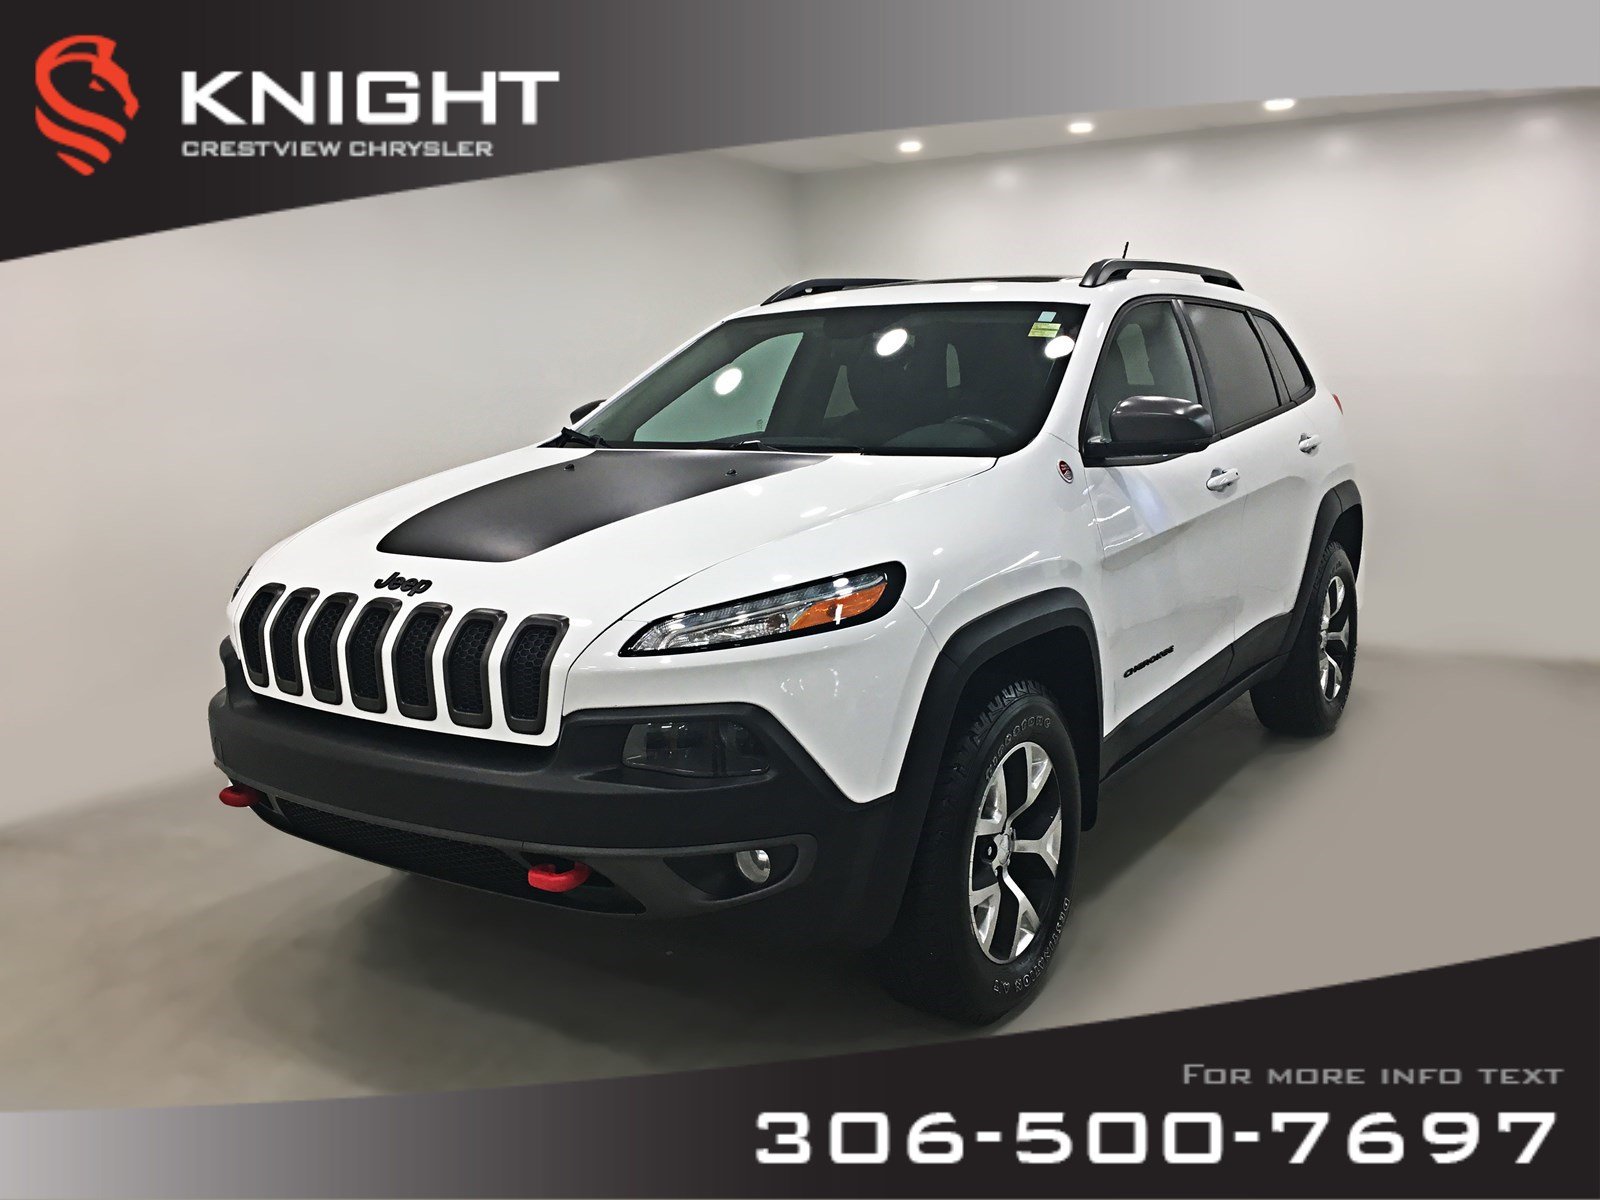 Pre Owned 2015 Jeep Cherokee Trailhawk 4x4 V6 Leather Sunroof Navigation With Navigation 4wd